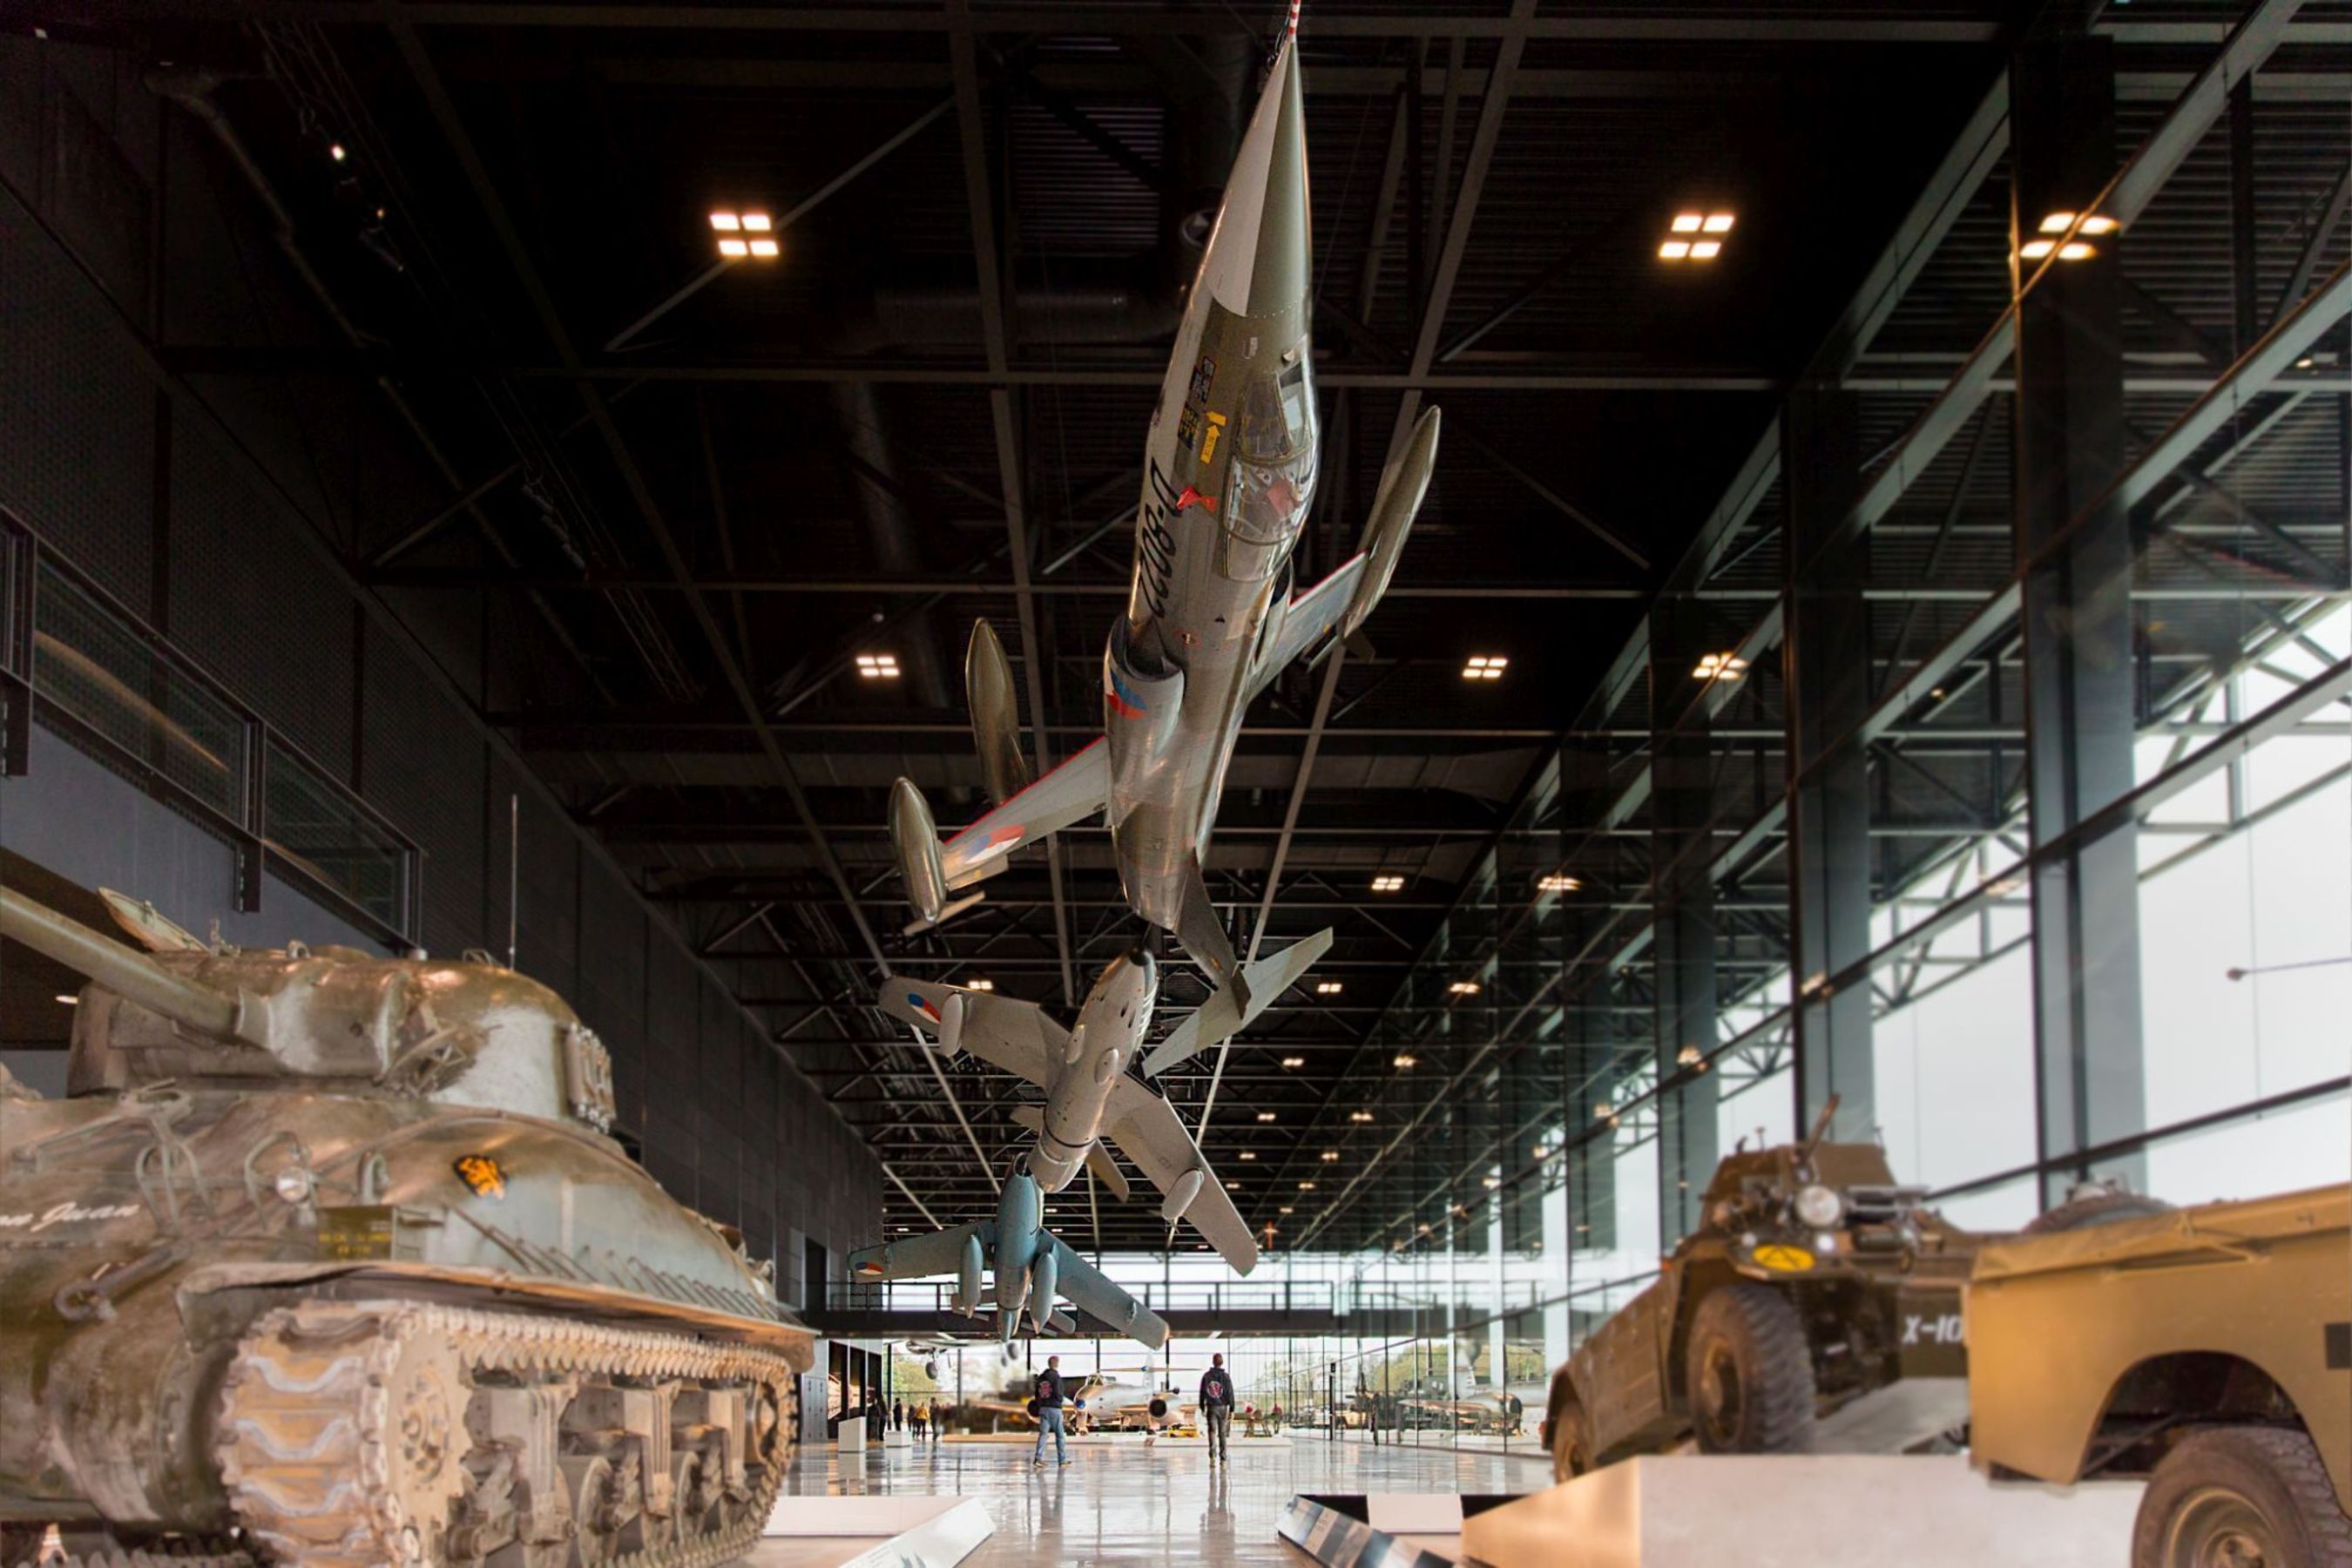 On Thursday 11 December, His Majesty the King Willem Alexander will open the National Military Museum at the former Soesterberg air base in the Netherlands.The National Military Museum (NMM) is dedicated to showing the significance of the Netherlands armed forces to society in the past, present and future. (PRNewsFoto/National Military Museum)